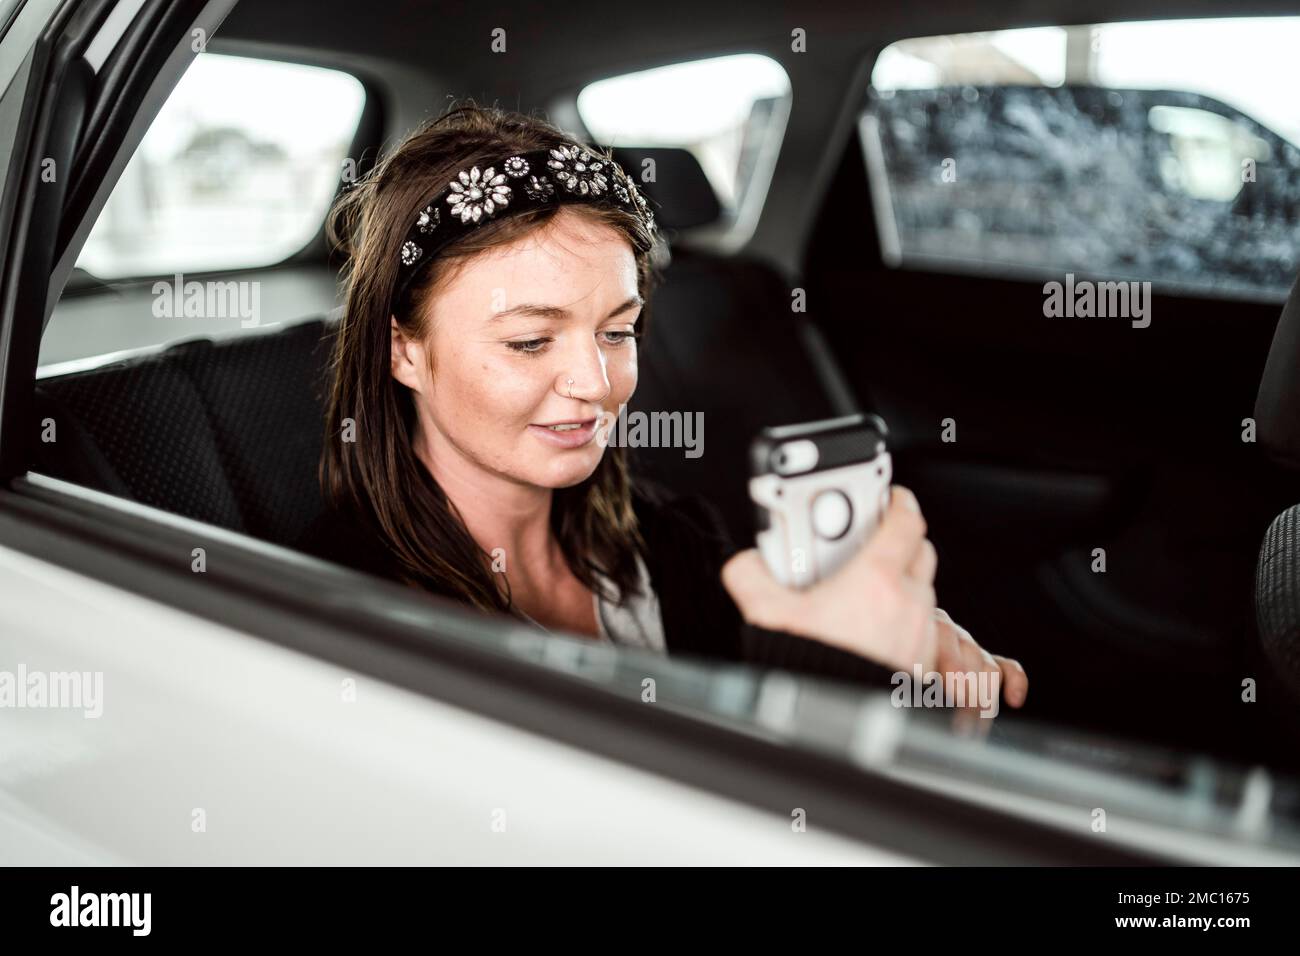 A taxi or Uber passenger talking through the phone on the car back seat Stock Photo